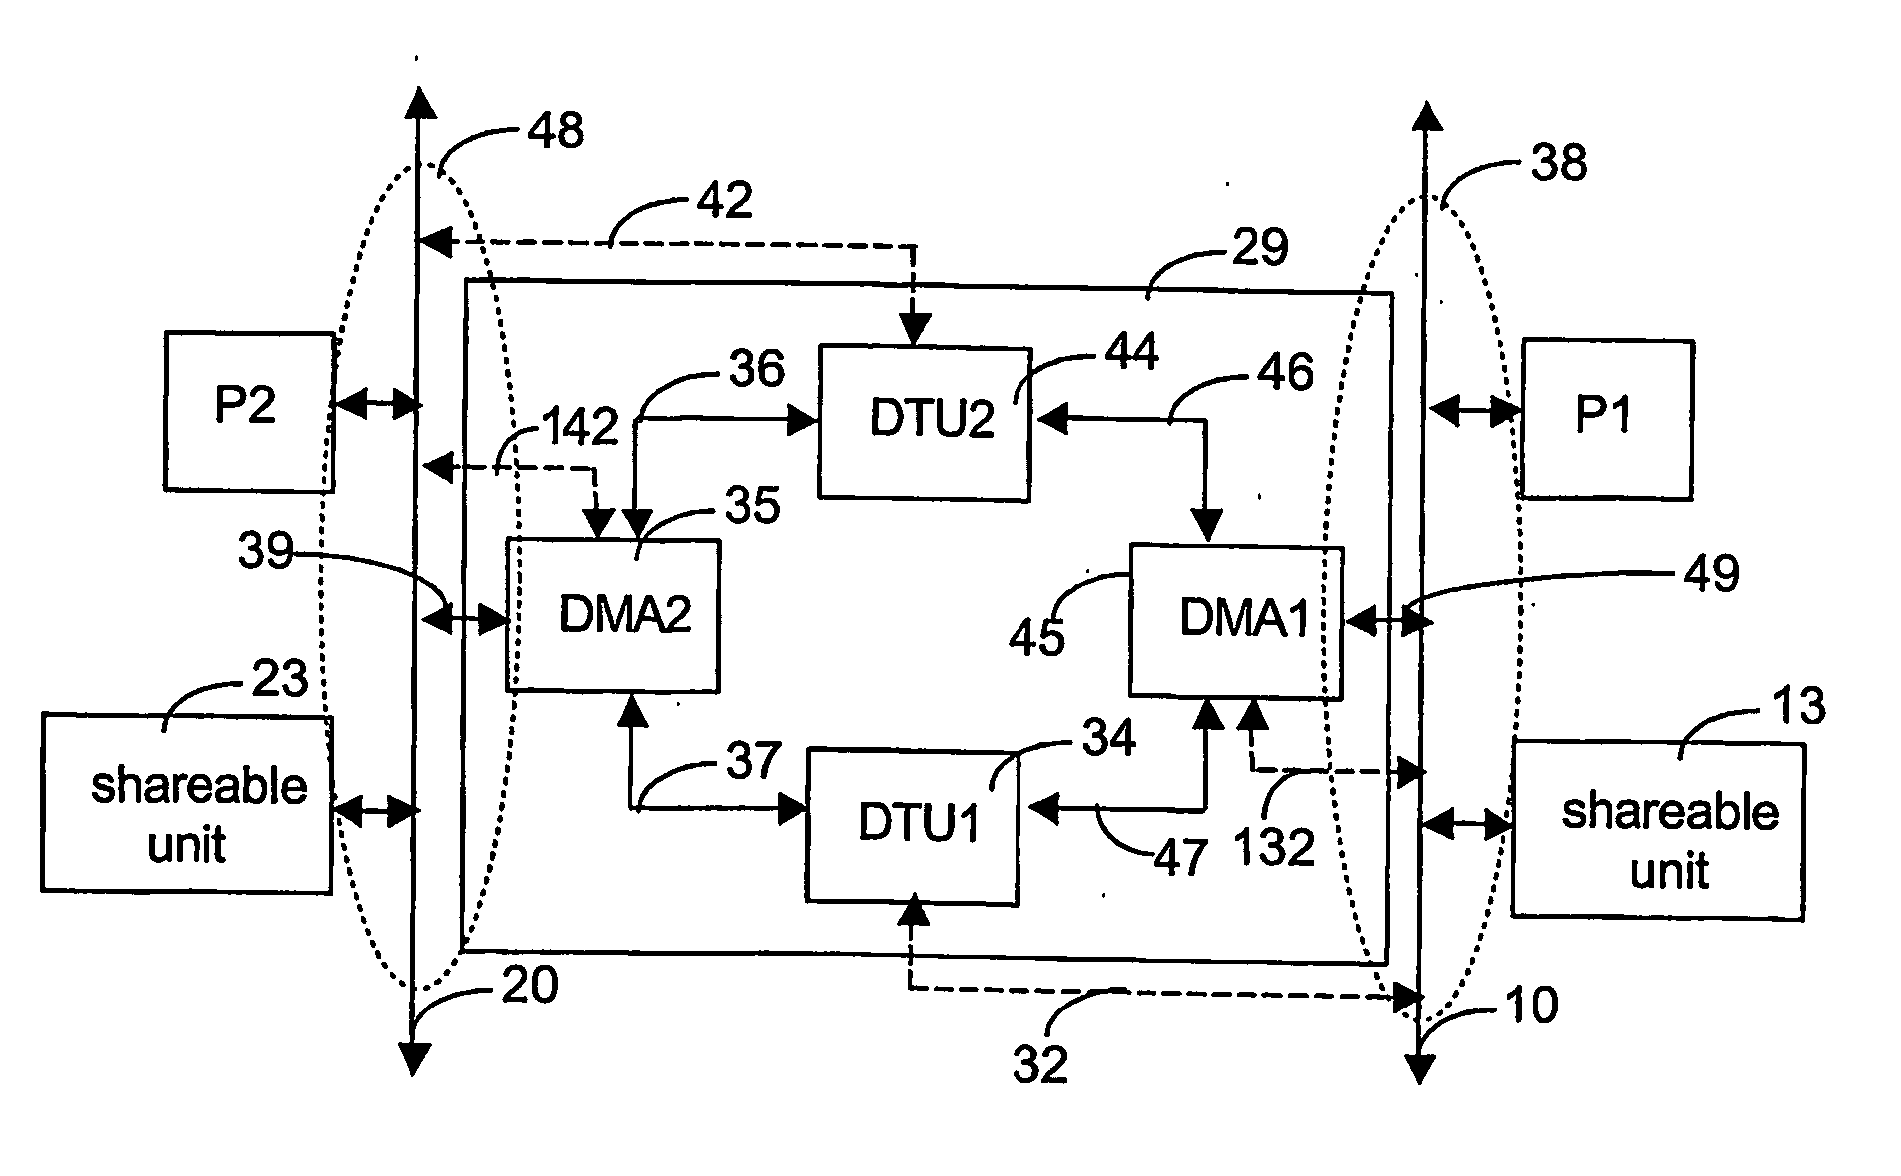 Inter-processor communication system for communication between processors